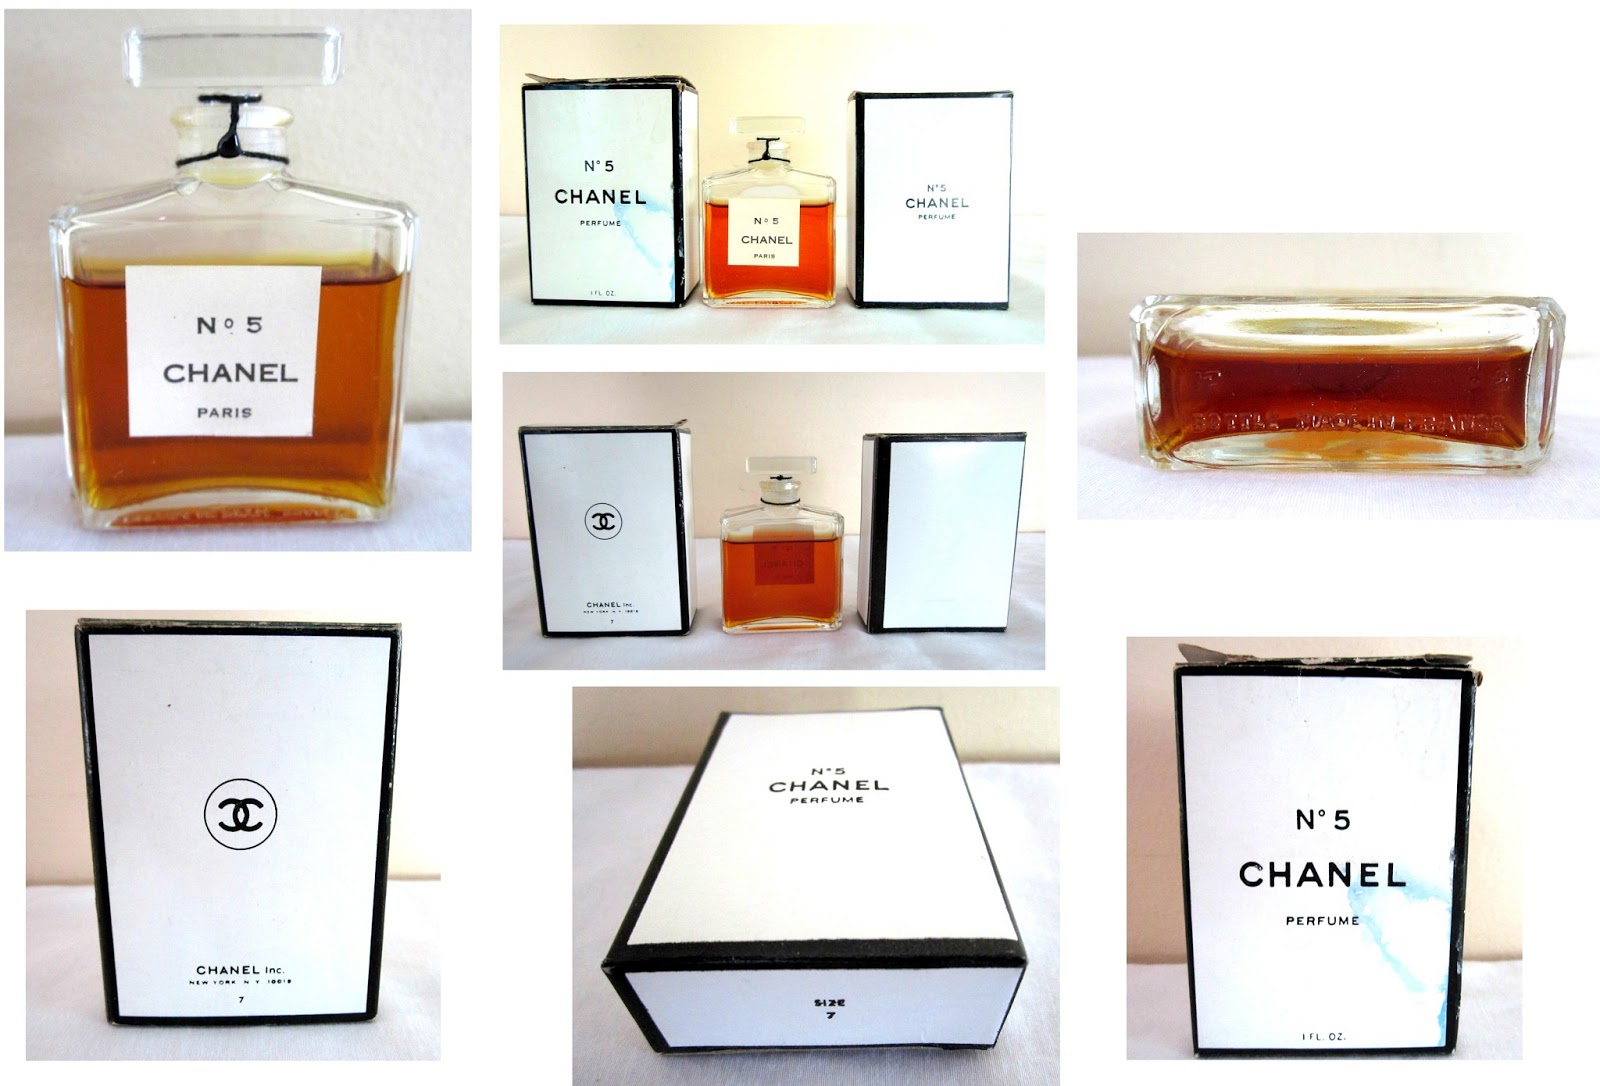 Chanel in #591 Alchimie + Comparisons